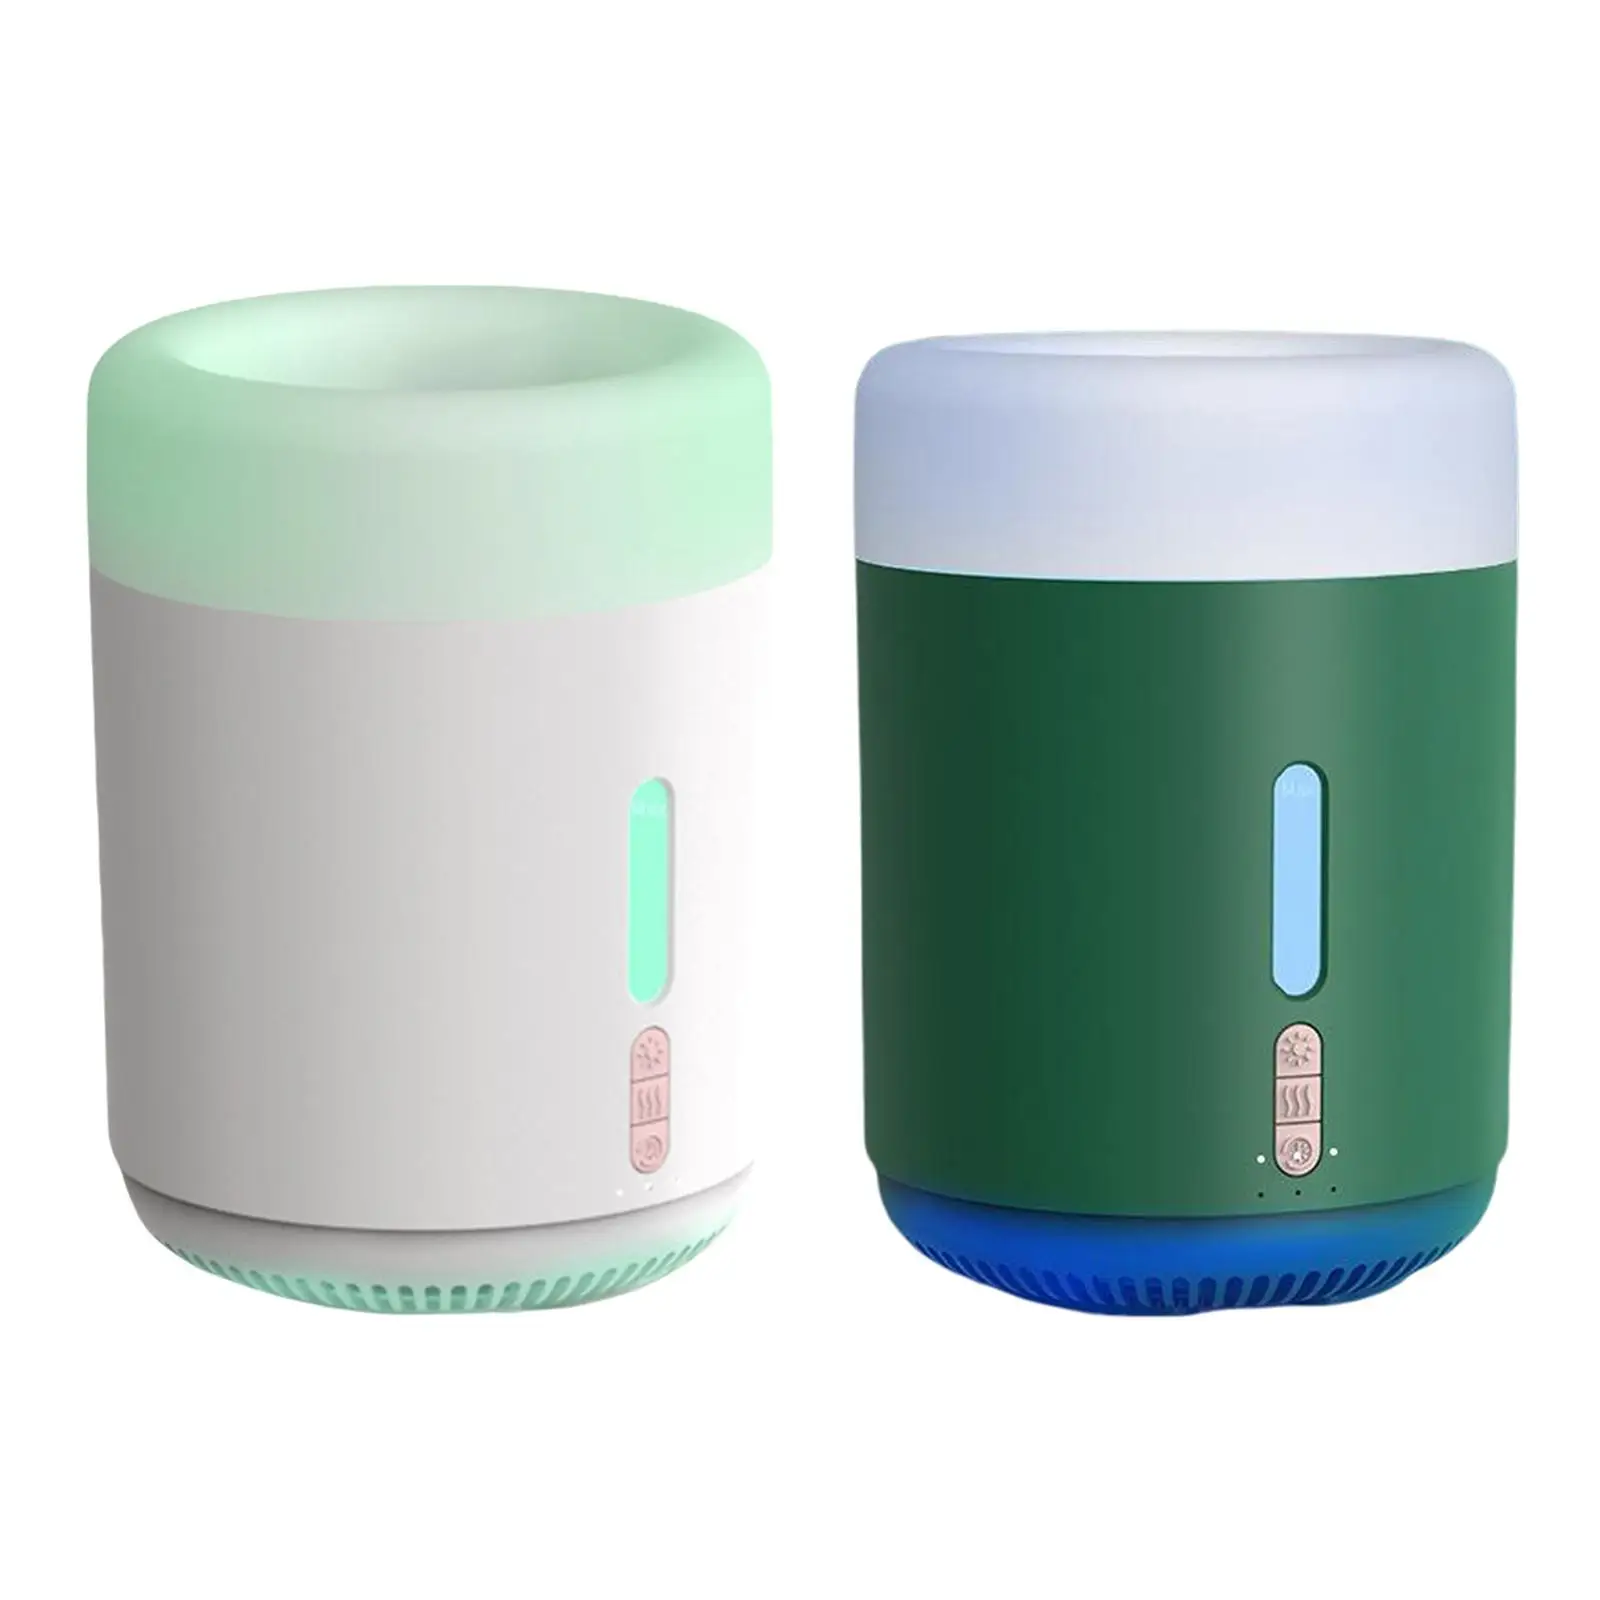 USB Ultrasonic Humidifier Household Aroma Diffuser Cool Mist Maker with Light Quiet Anti-slip for Home Living Room